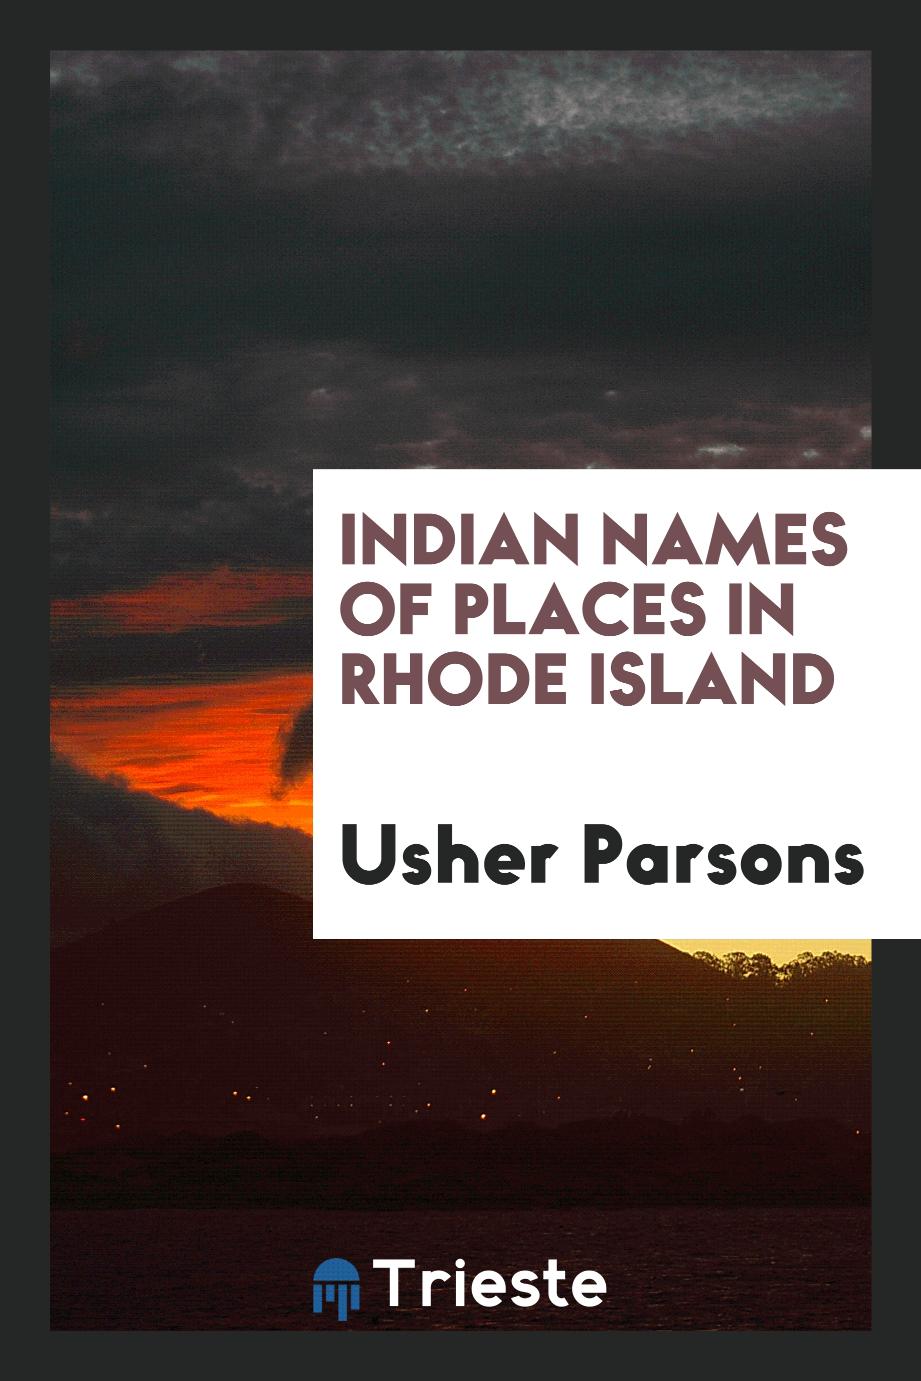 Indian names of places in Rhode Island - Usher Parsons